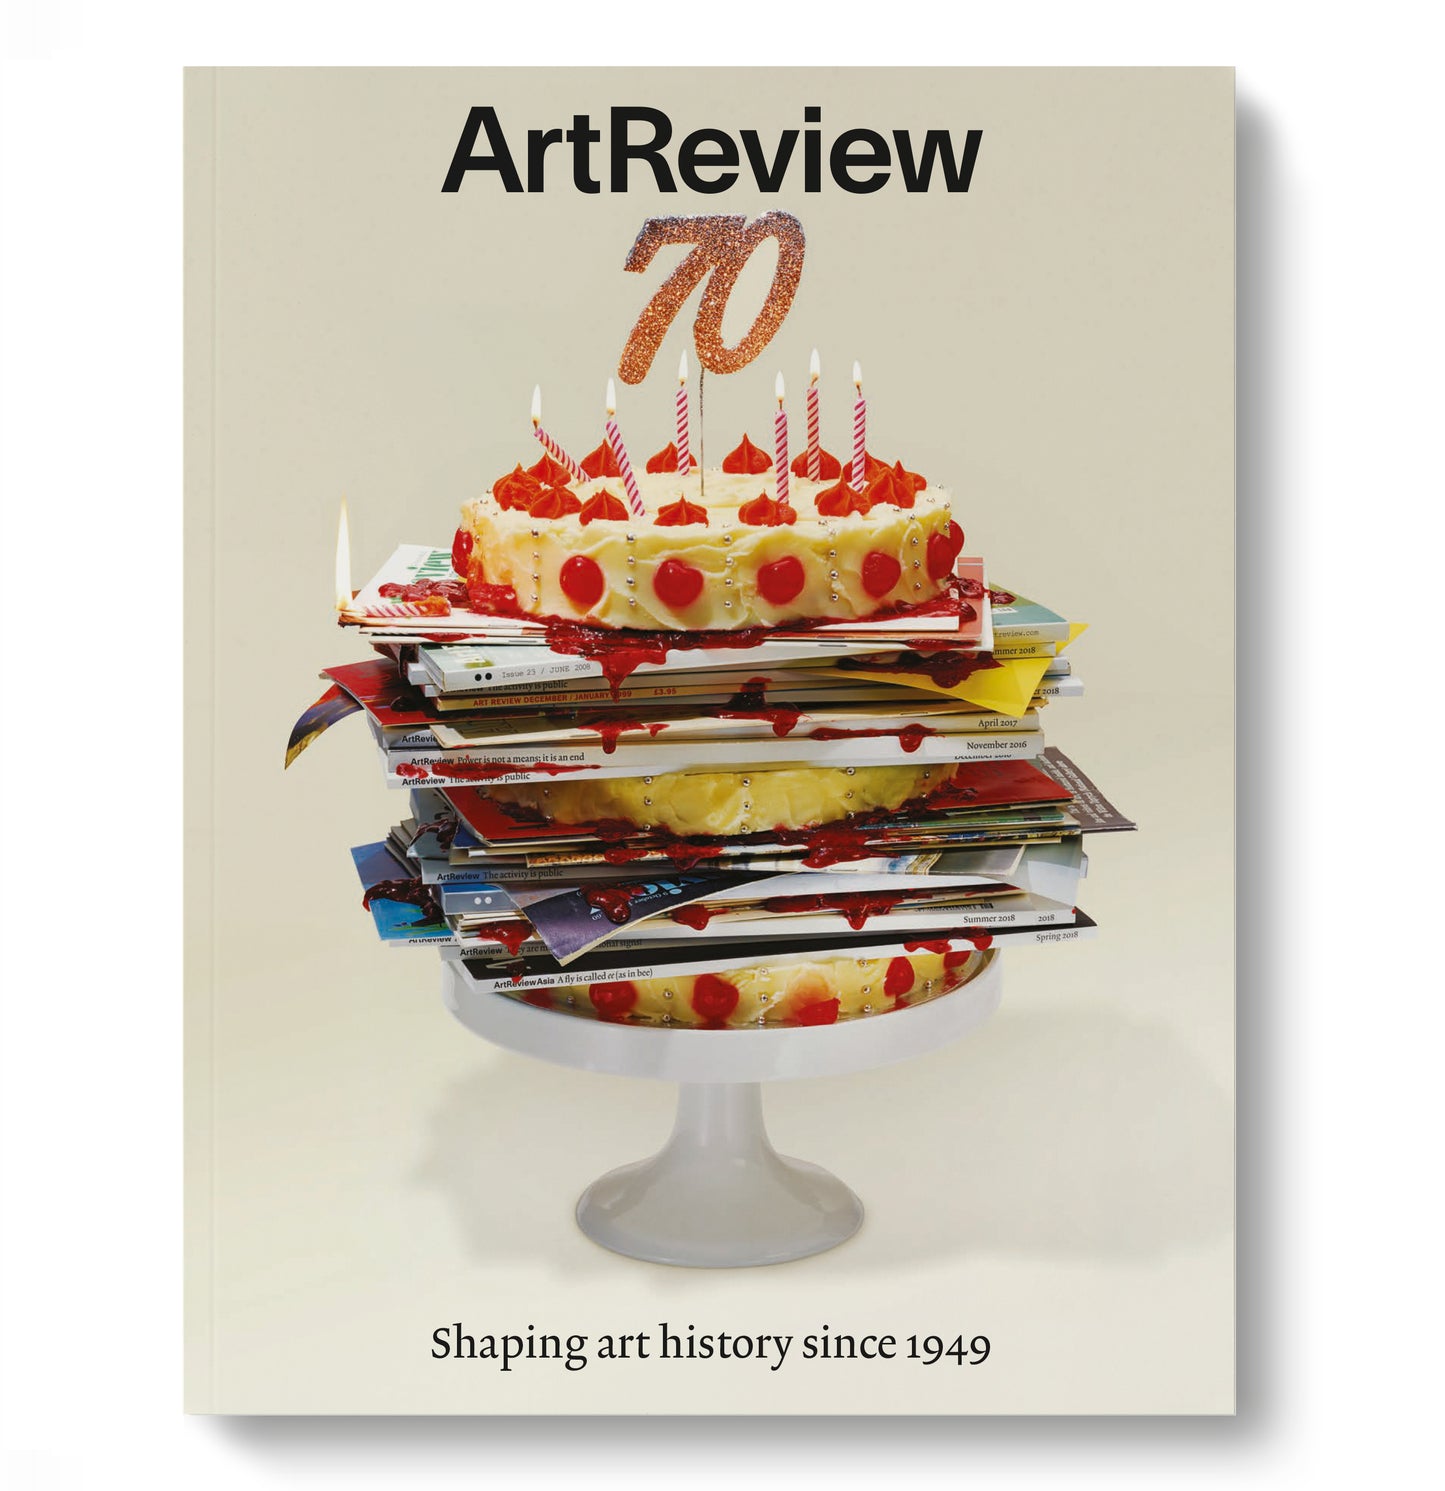 ArtReview March 2019 - 70th Anniversary